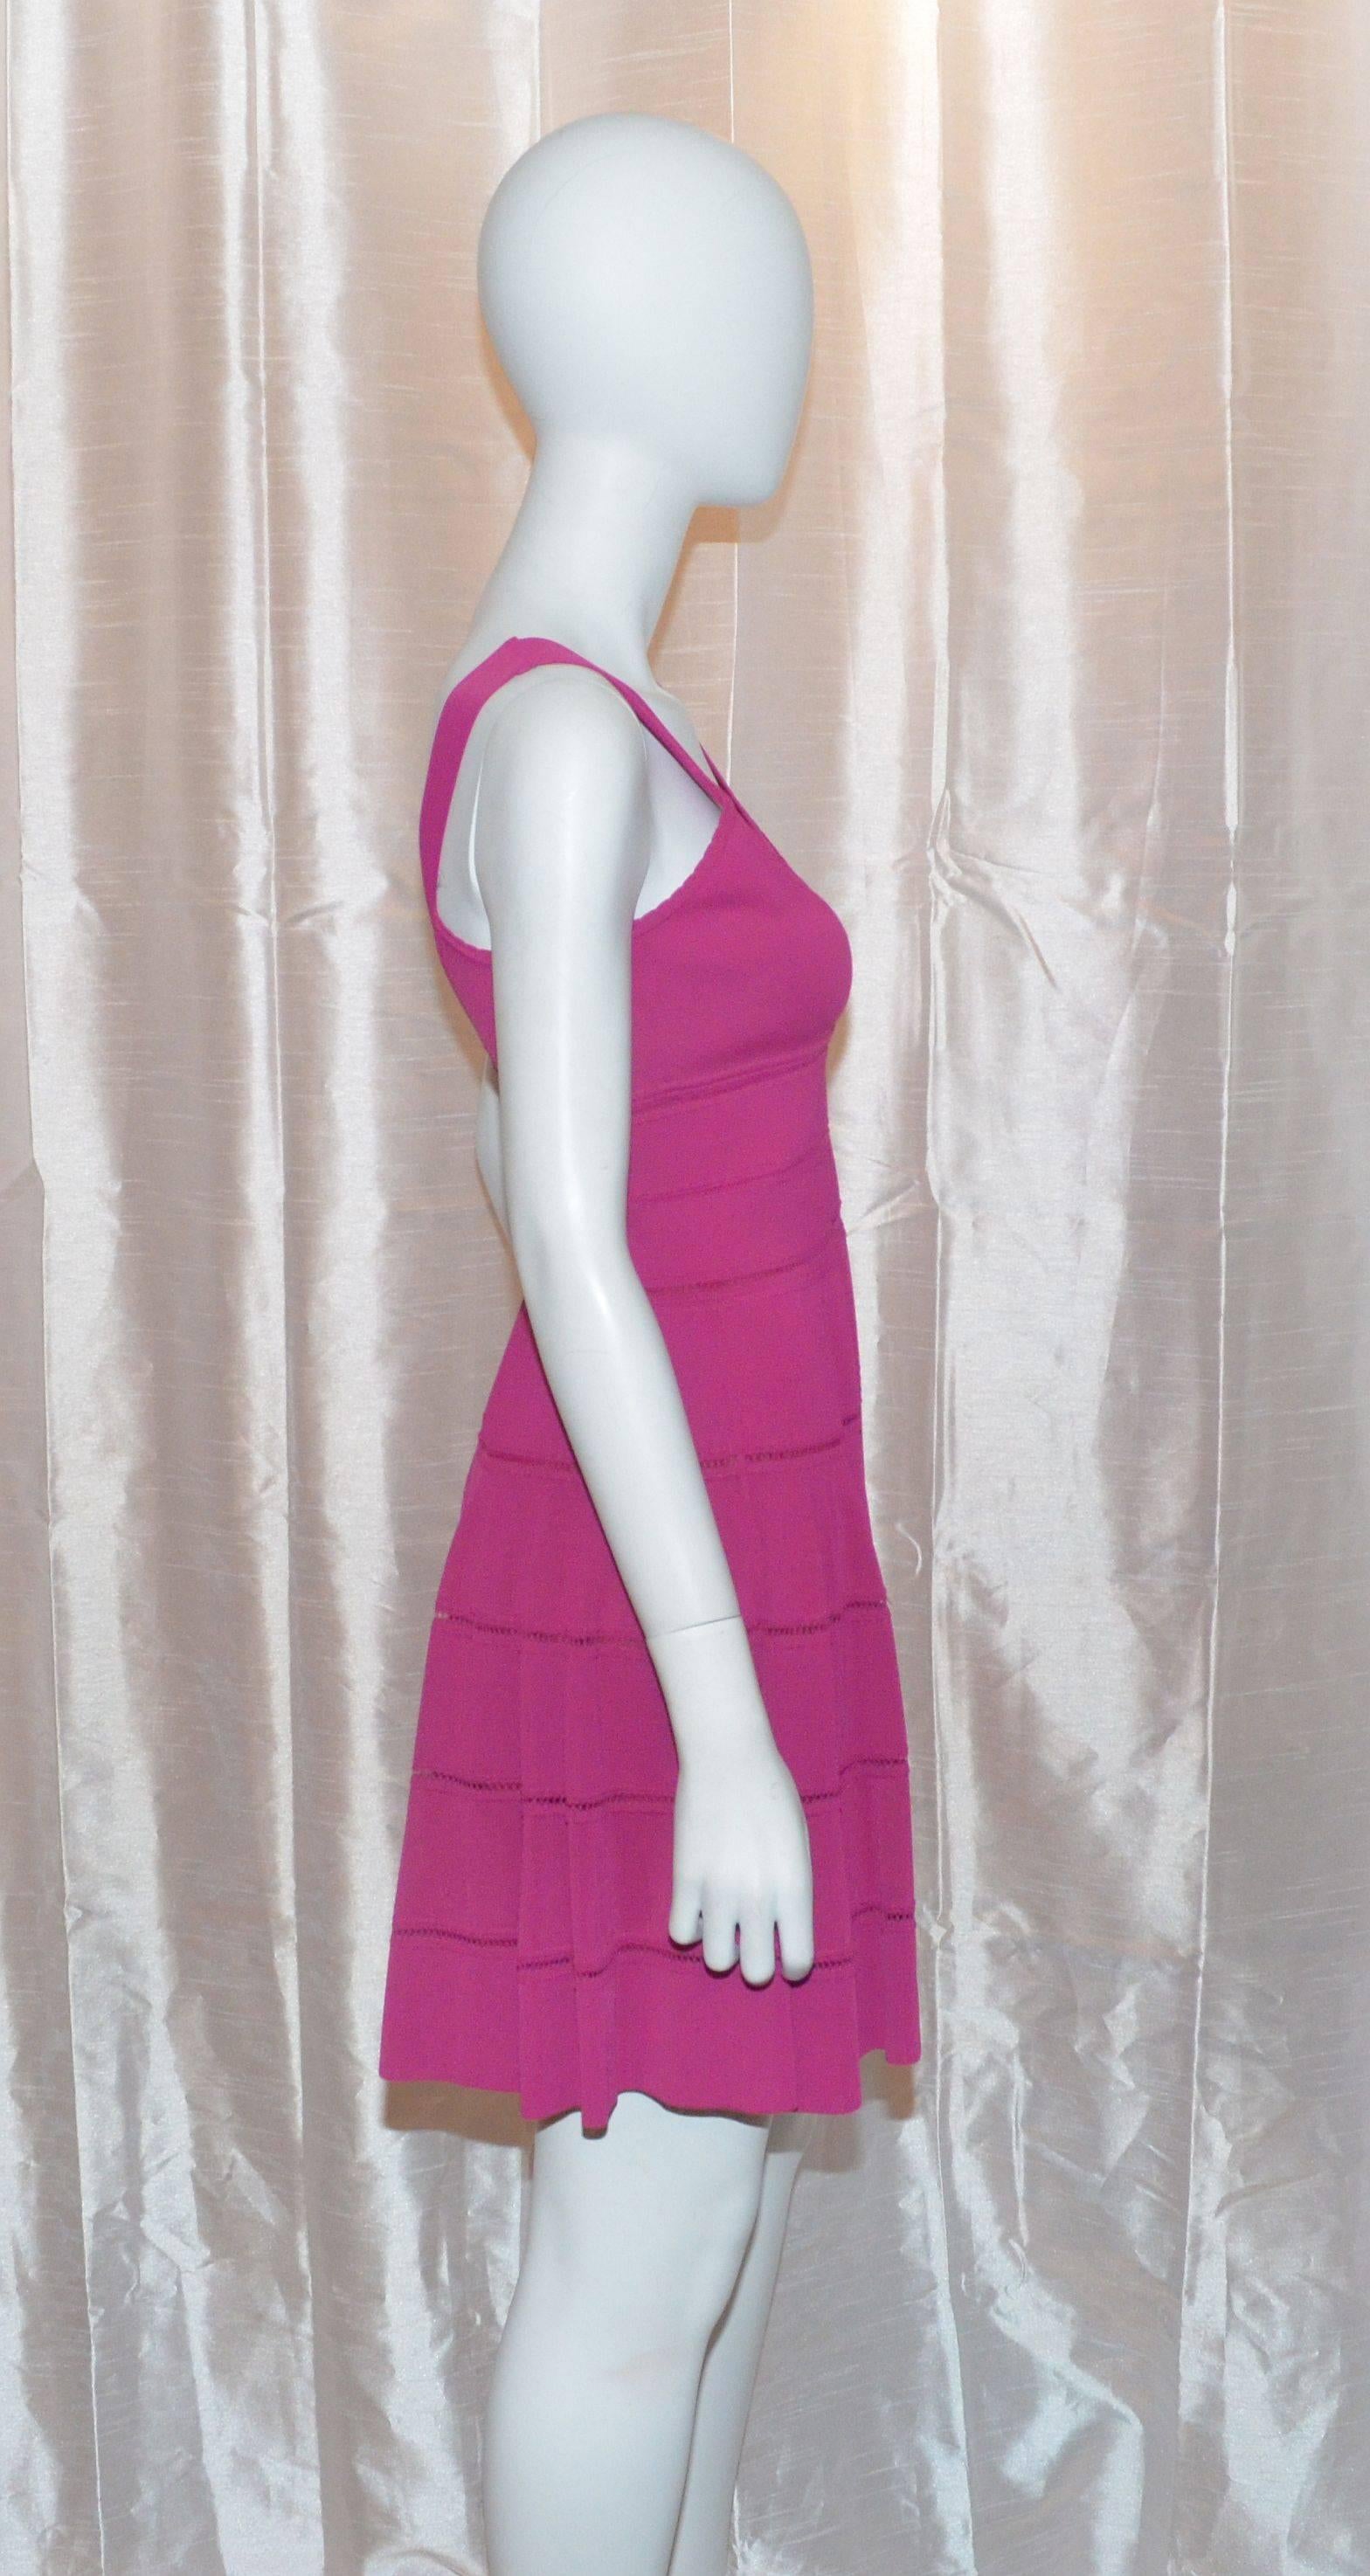 Christian Dior dress is made with 94% viscose, 5% polyamide, and 1% elastane; Double lining is made with 90% viscose and 10% lycra. Made in Italy, size 8. Dress has a concealed zipper fastening along the side of the bodice. Stretch fabric with